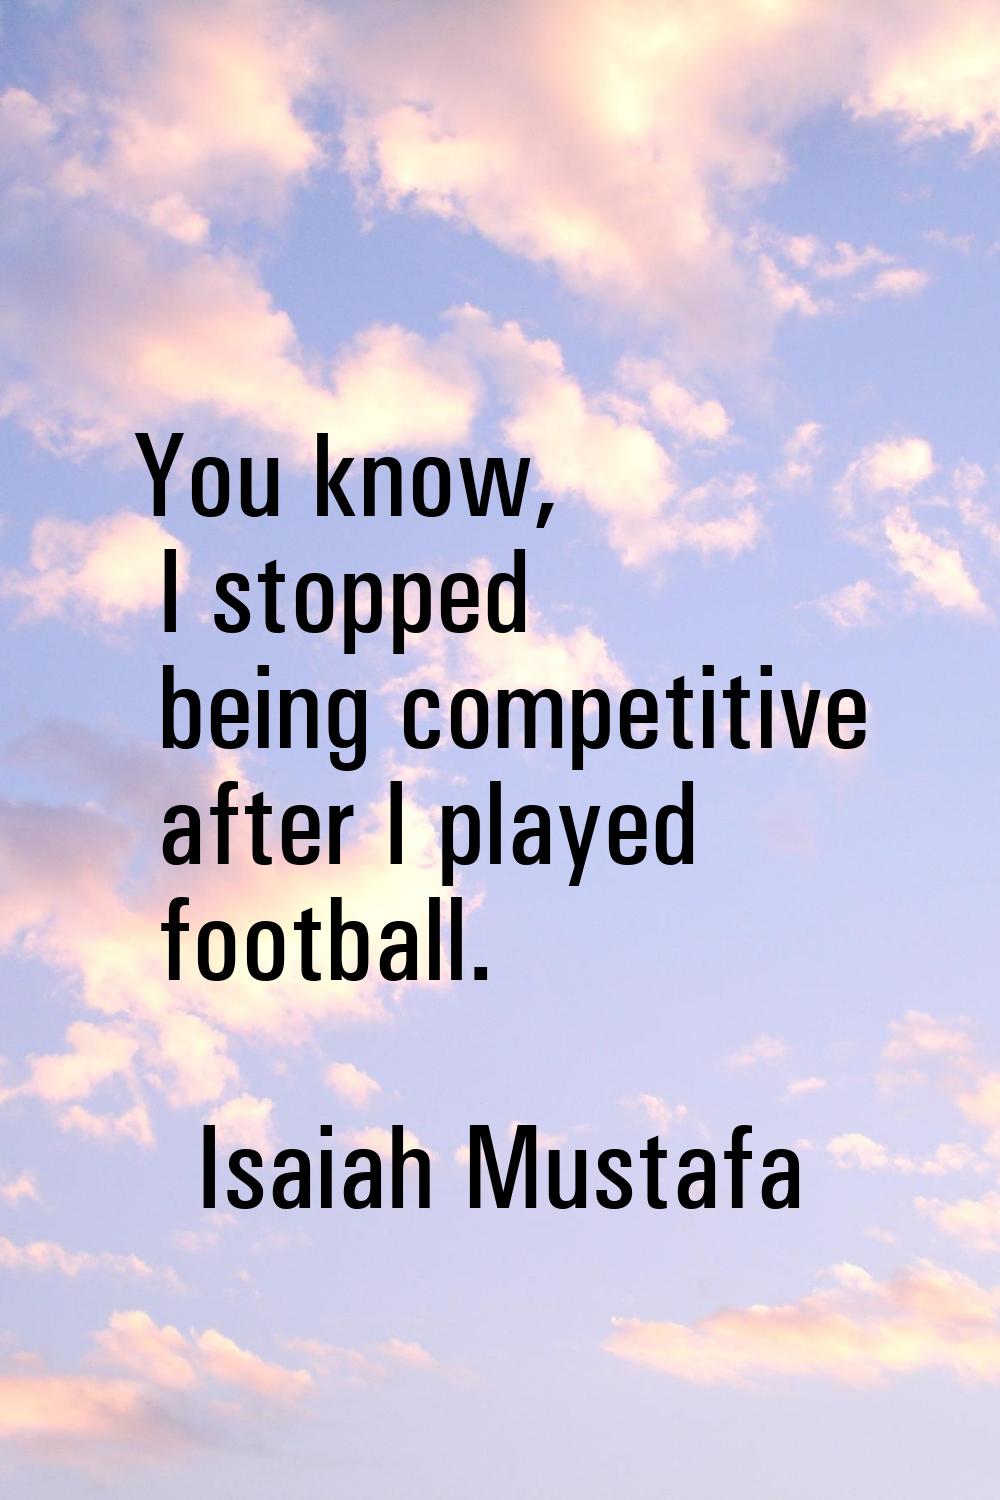 You know, I stopped being competitive after I played football.